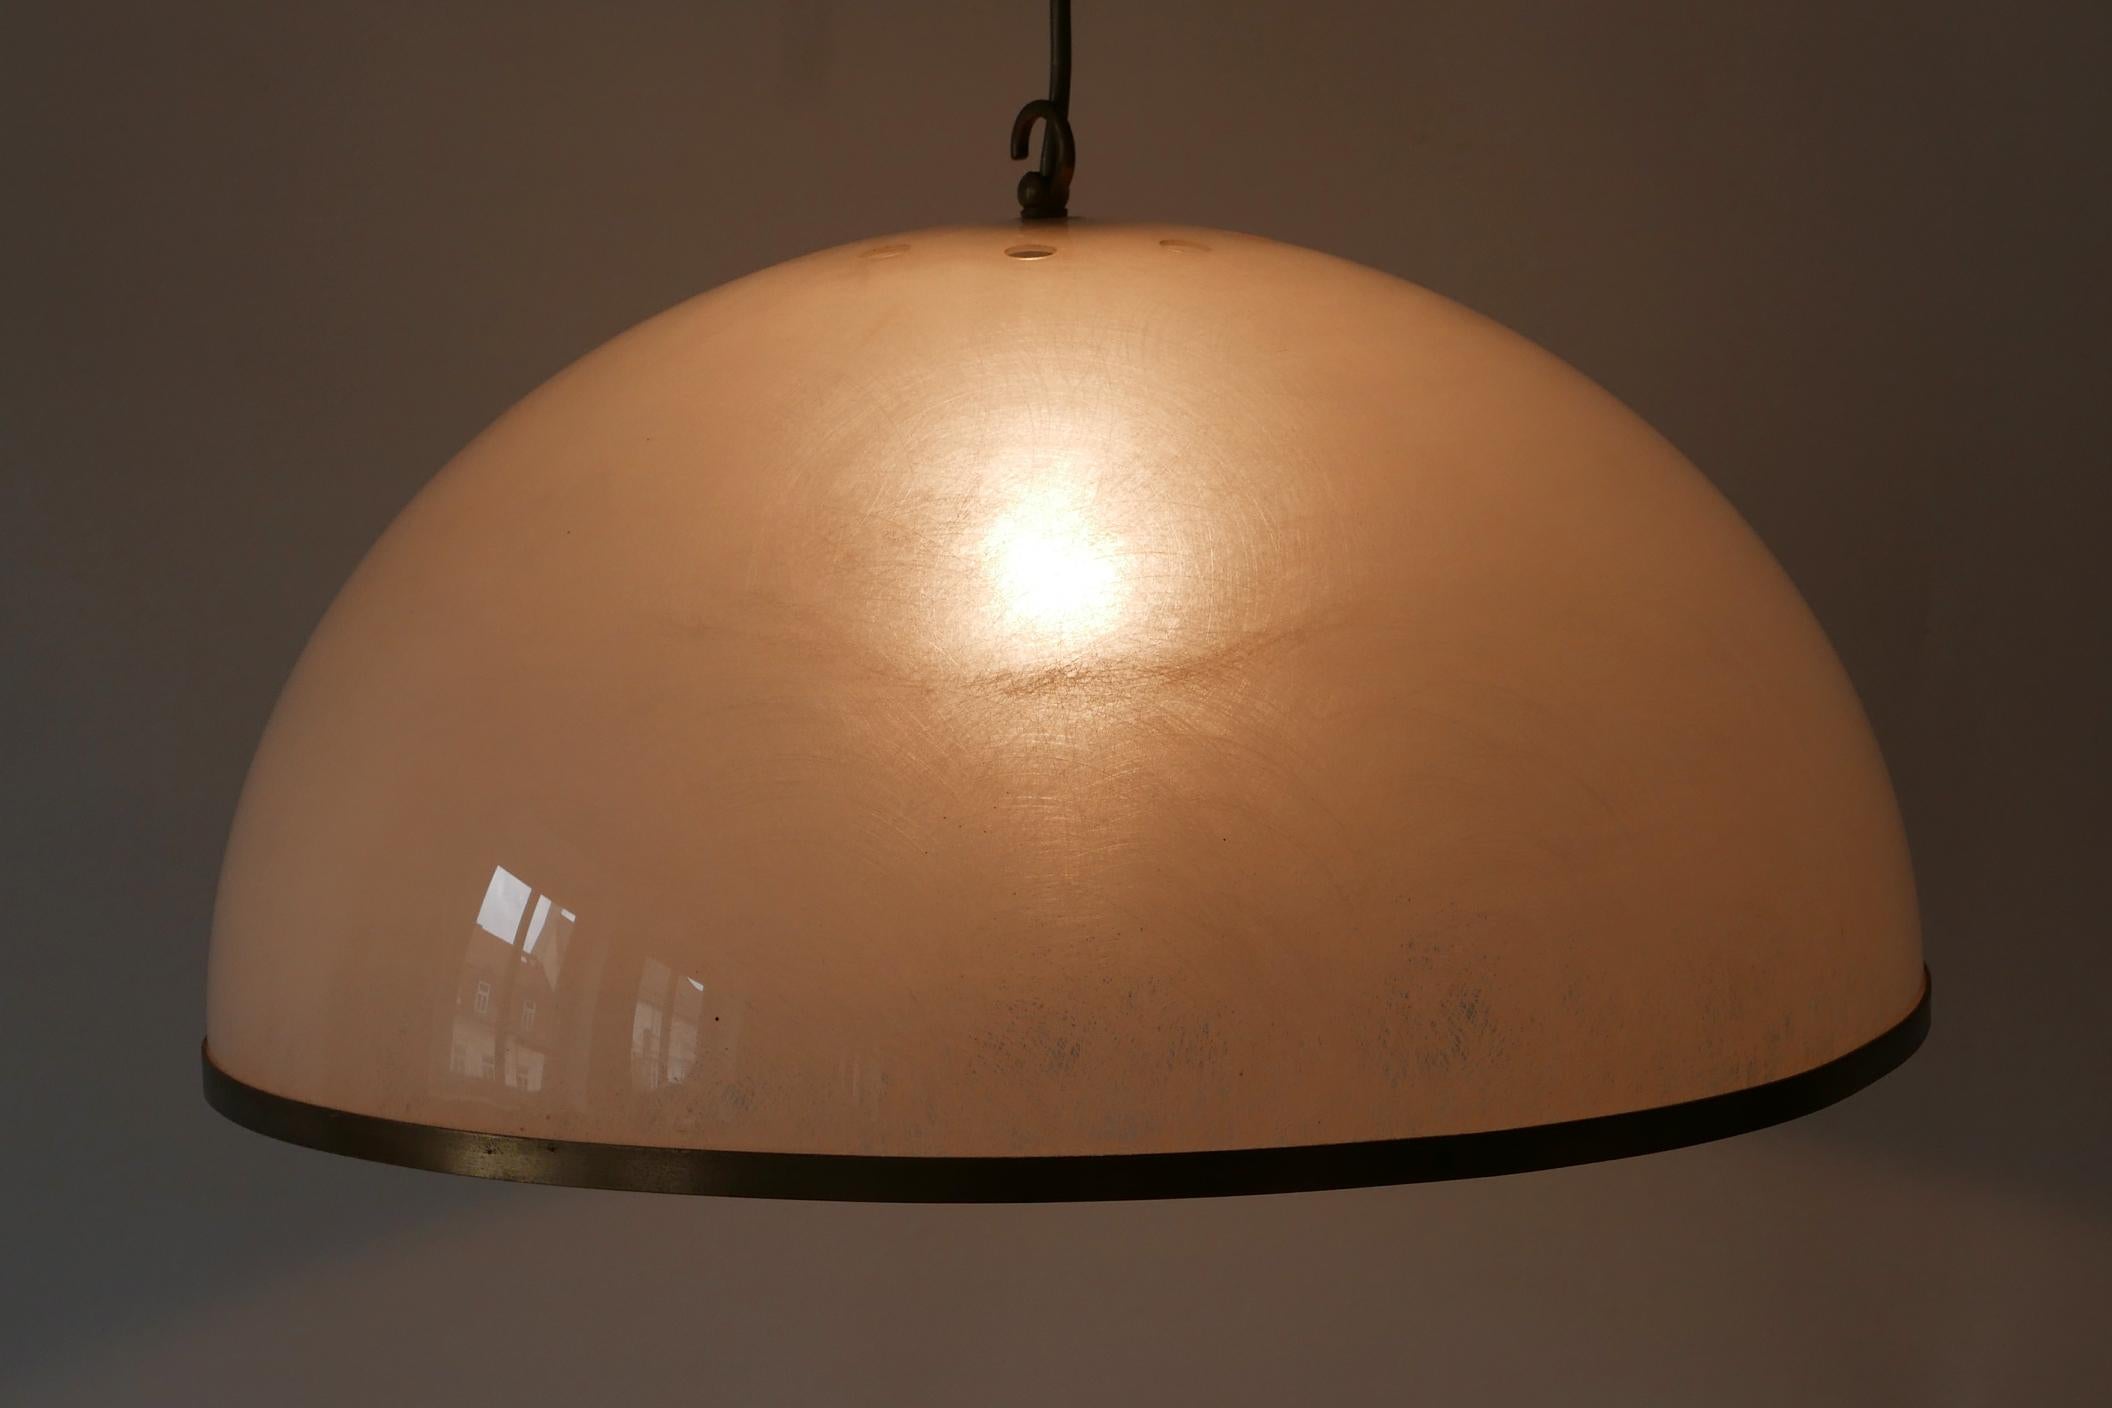 Lovely Mid-Century Modern pendant lamp or hanging light. Manufactured probably in Italy, 1970s.

Executed in textured lucite and brass, it comes with 1 x E27 / 26 Edison screw fit bulb holder, is wired and in working condition. It runs both on